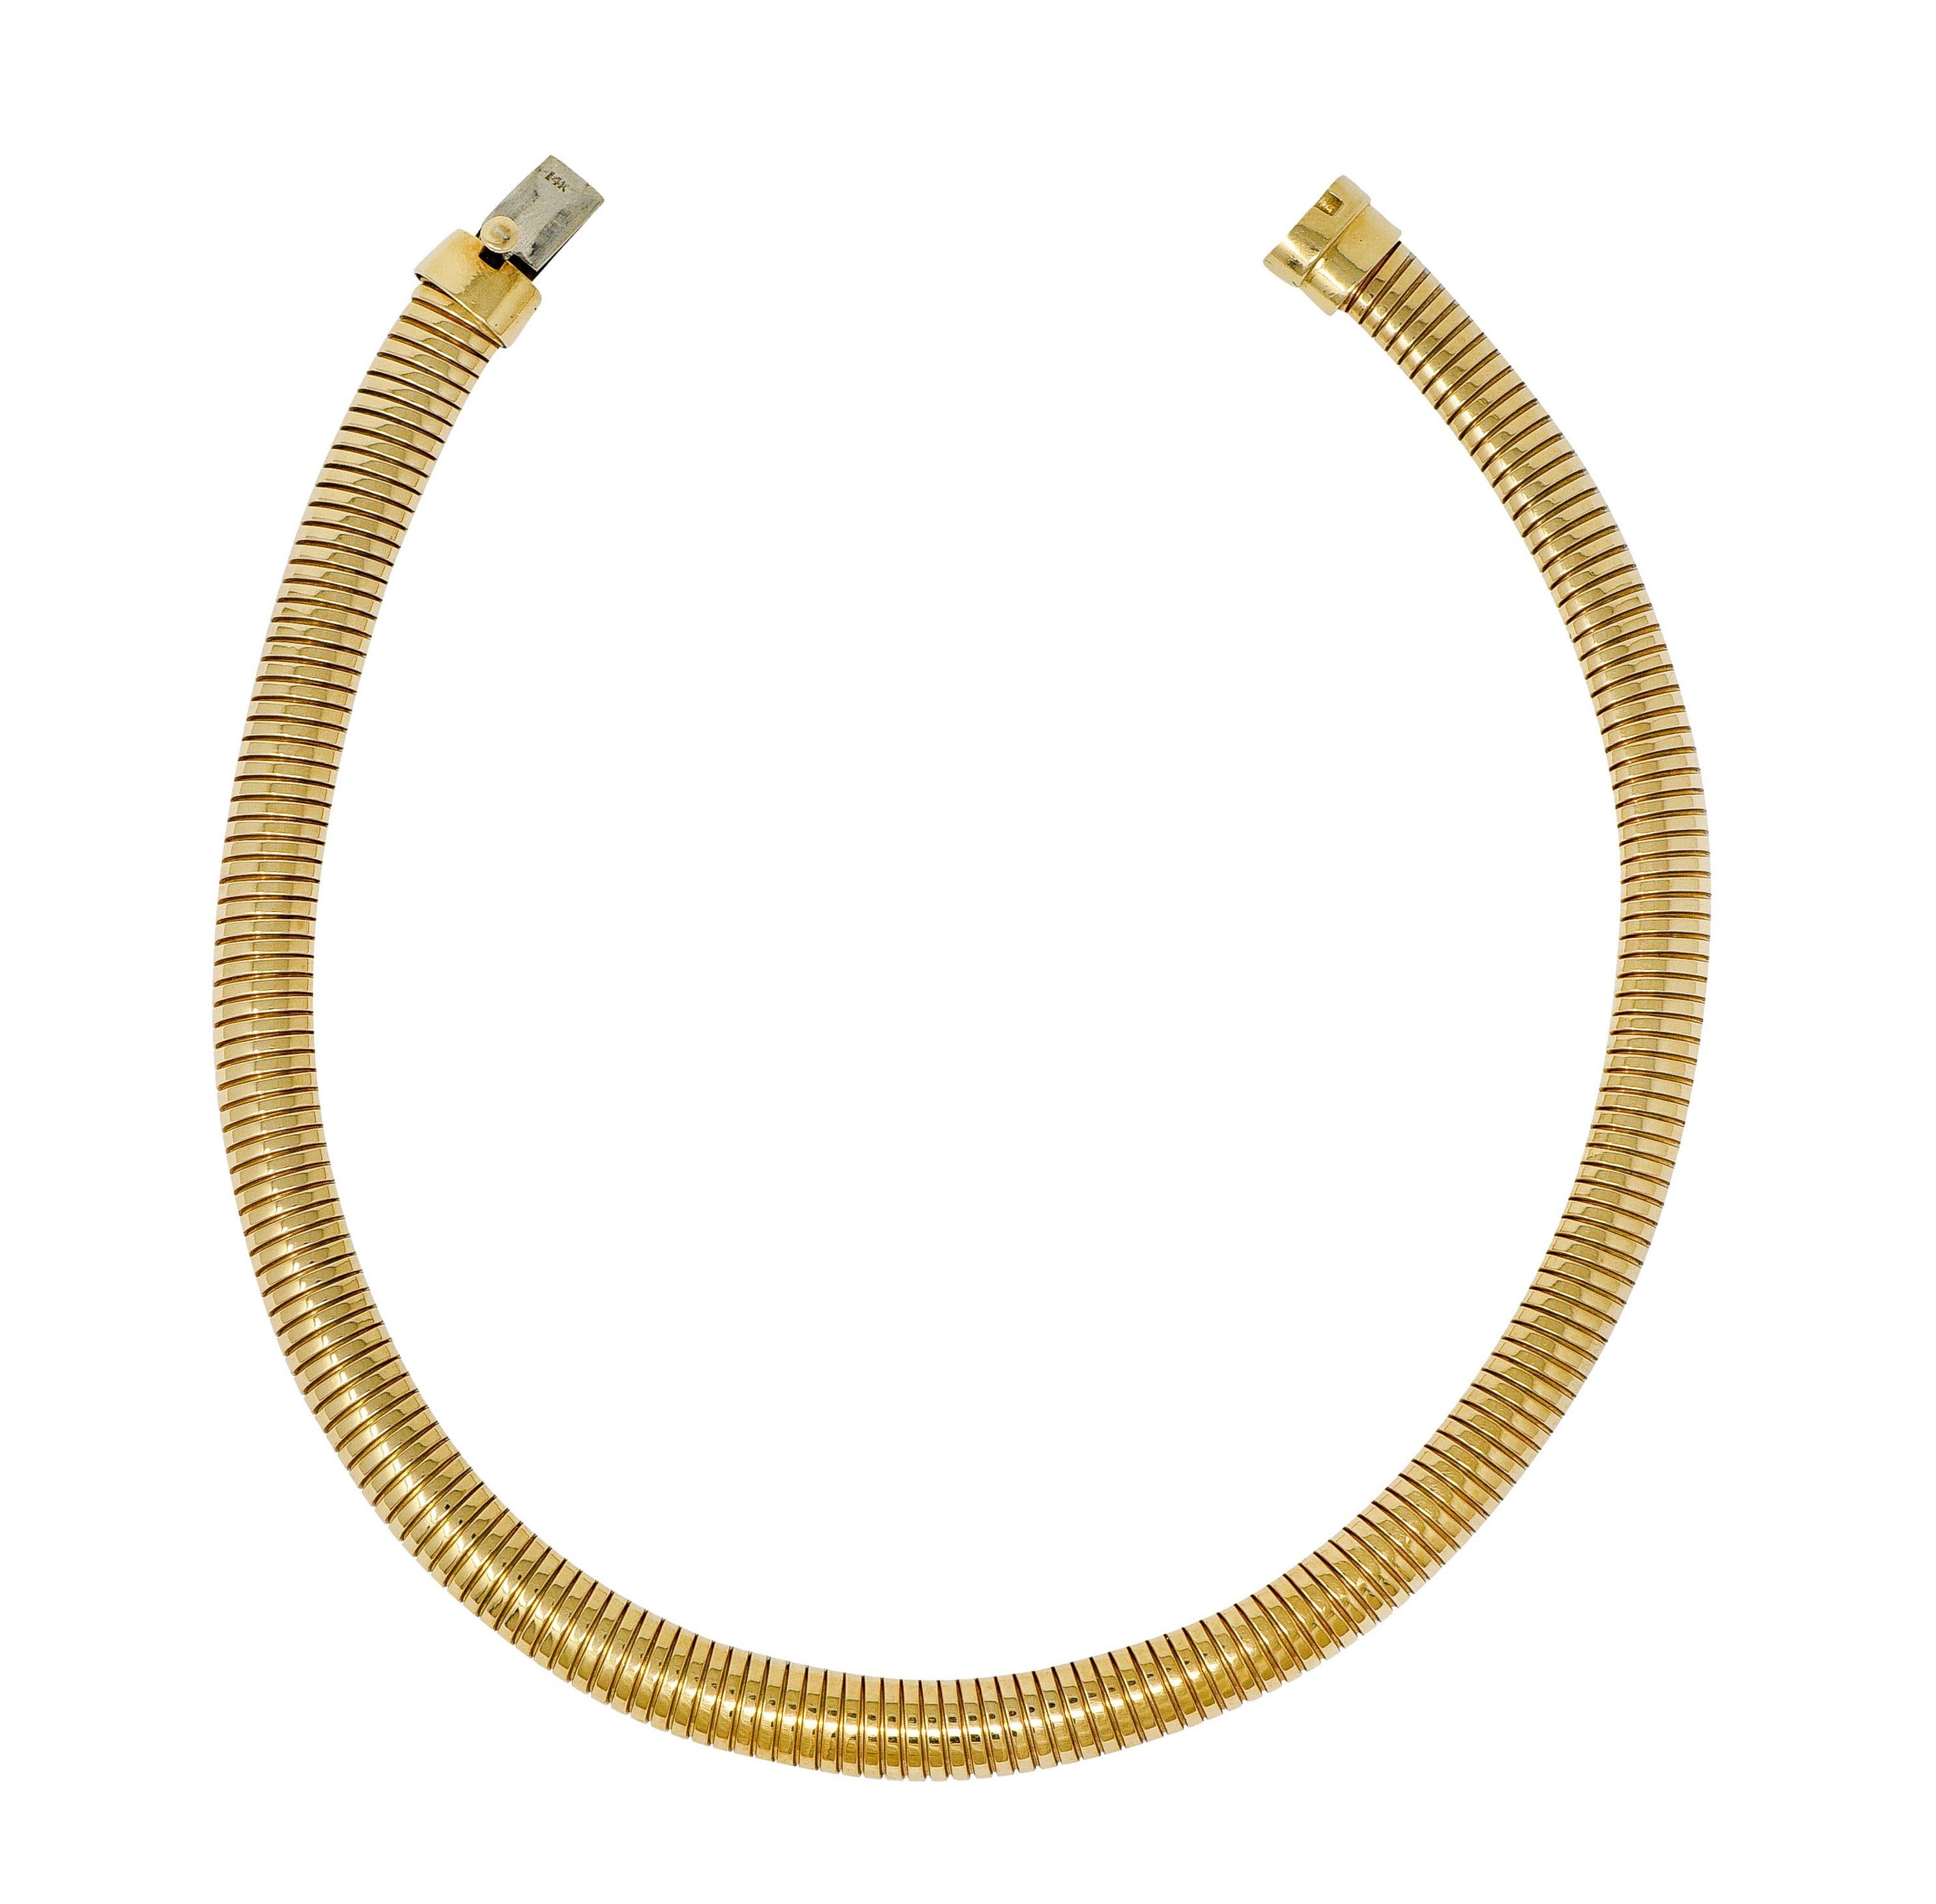 Collar style necklace designed with light and springy tubogas technology

Deeply ridged throughout with a bright finish

Completed by a concealed clasp with presser

Stamped 14K for 14 karat gold

Circa: 1980s

Length approx.: 13 3/4 inches

Width: